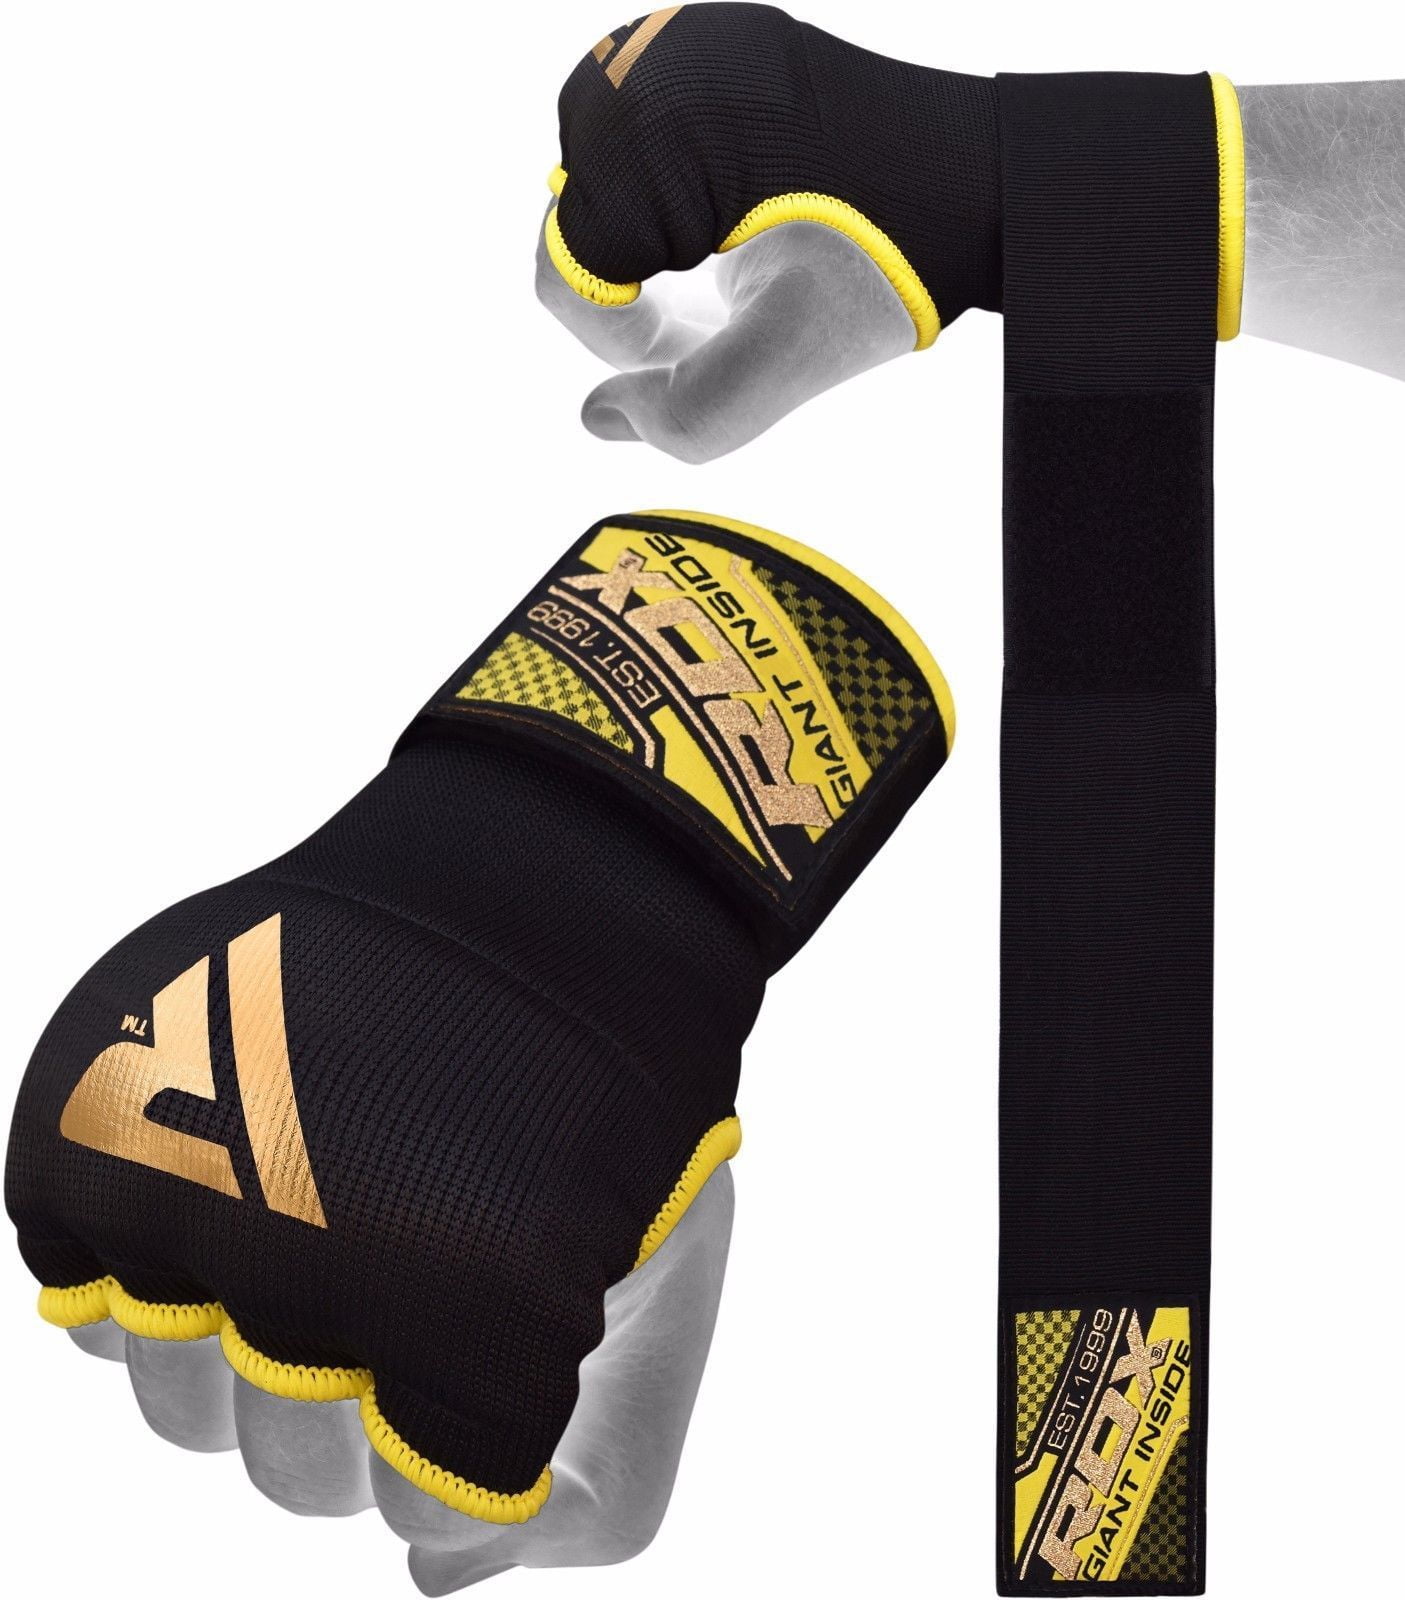 BLACK PADDED INNER GLOVE WRIST SUPPORTS FOR MARTIAL ARTS SPORTS v3 